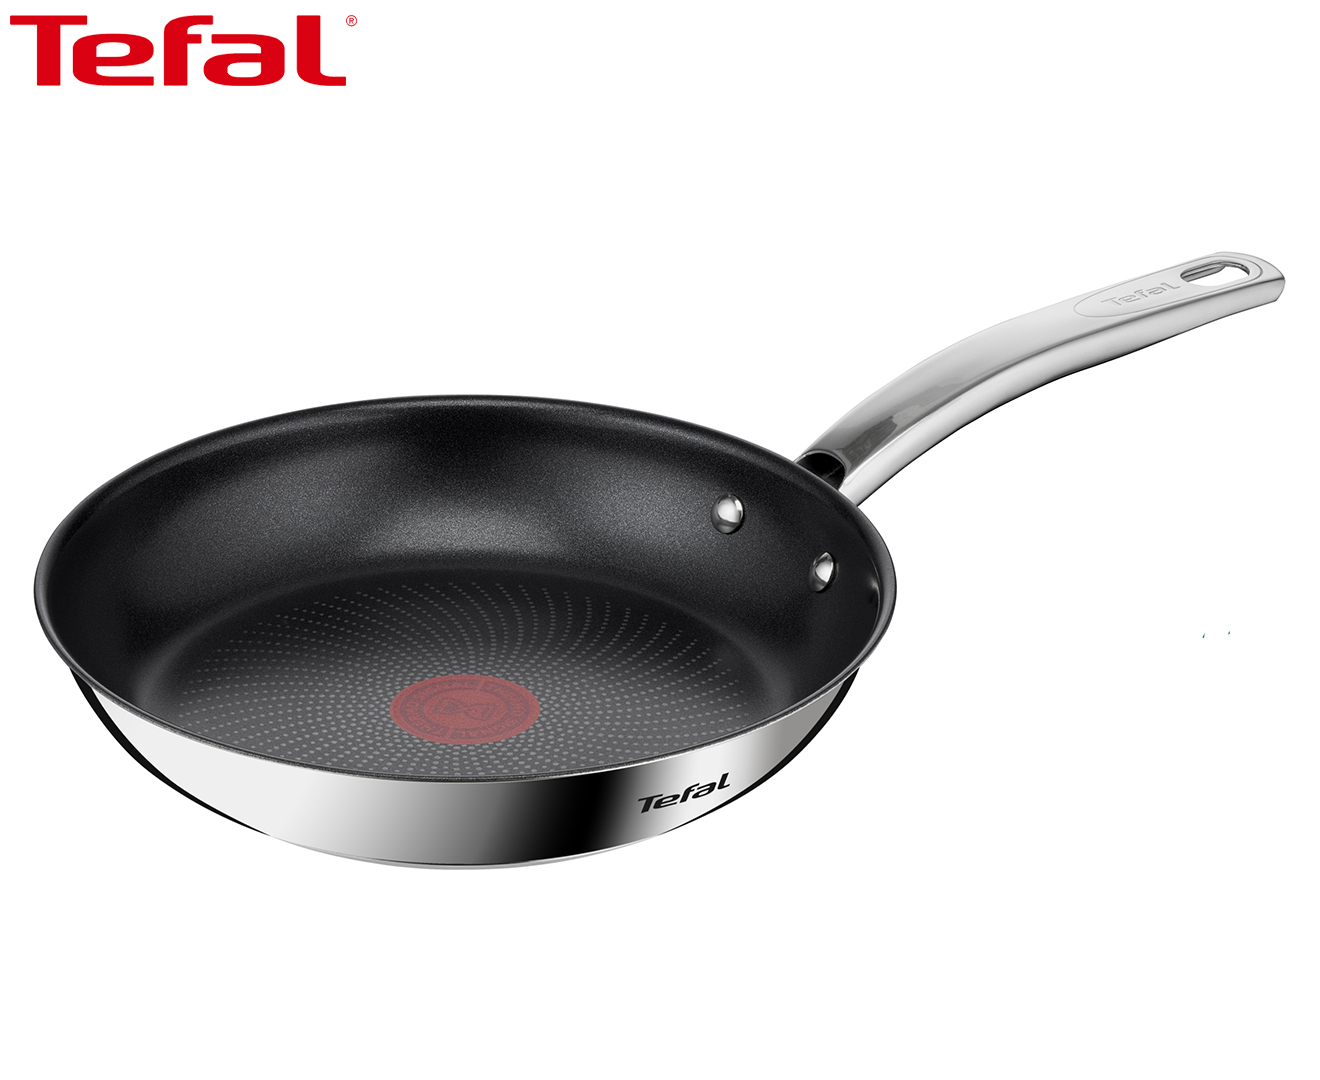 badminton Zie insecten Intensief Tefal 24cm Intuition Stainless Steel Induction Frypan | Catch.com.au